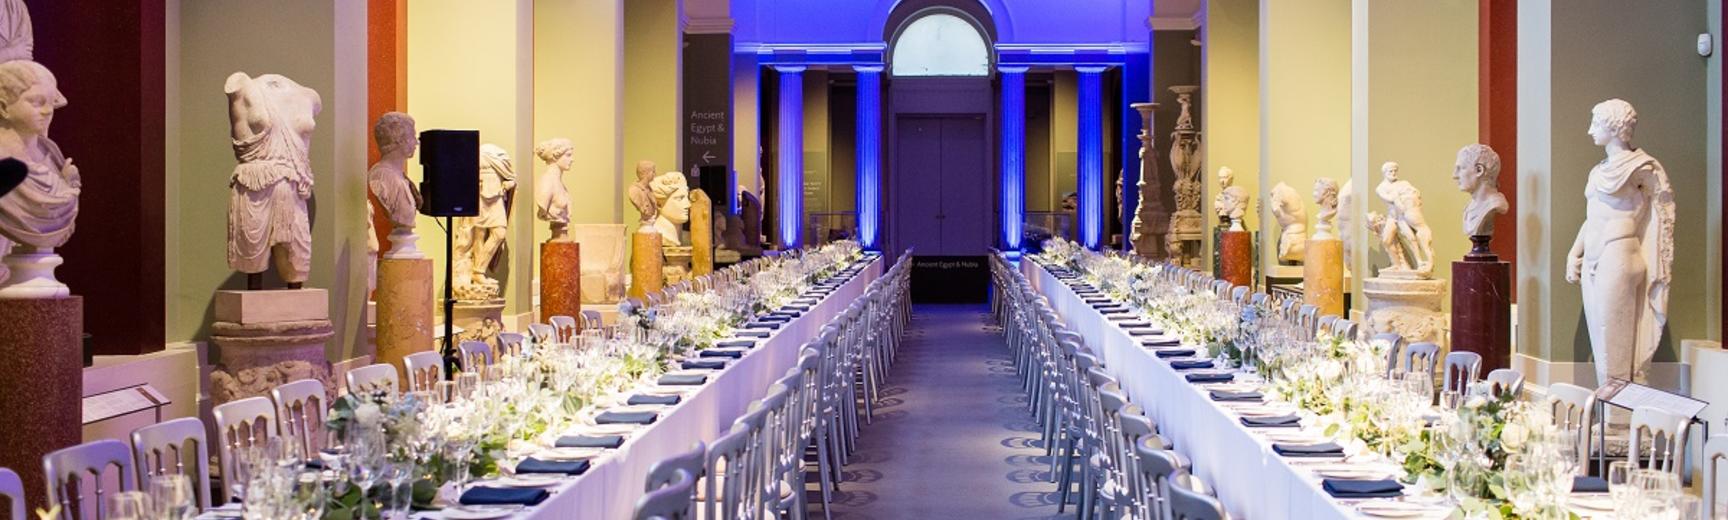 Dining event at the Ashmolean